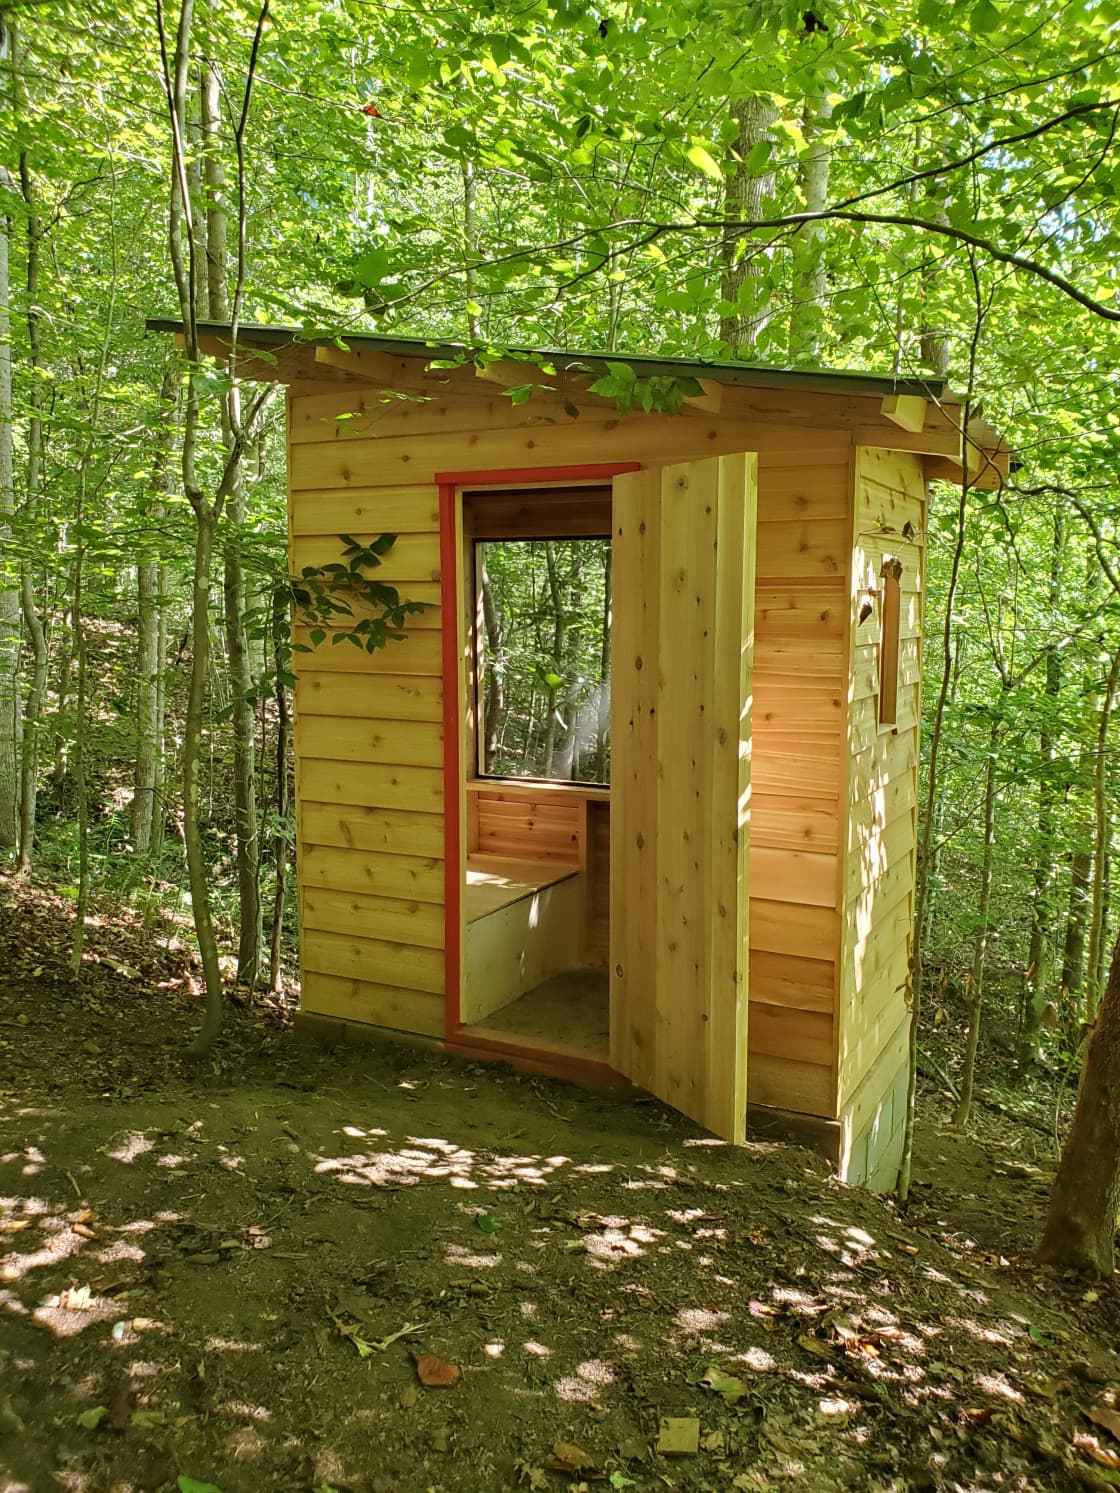 The outhouse, featuring a dry composting toilet.